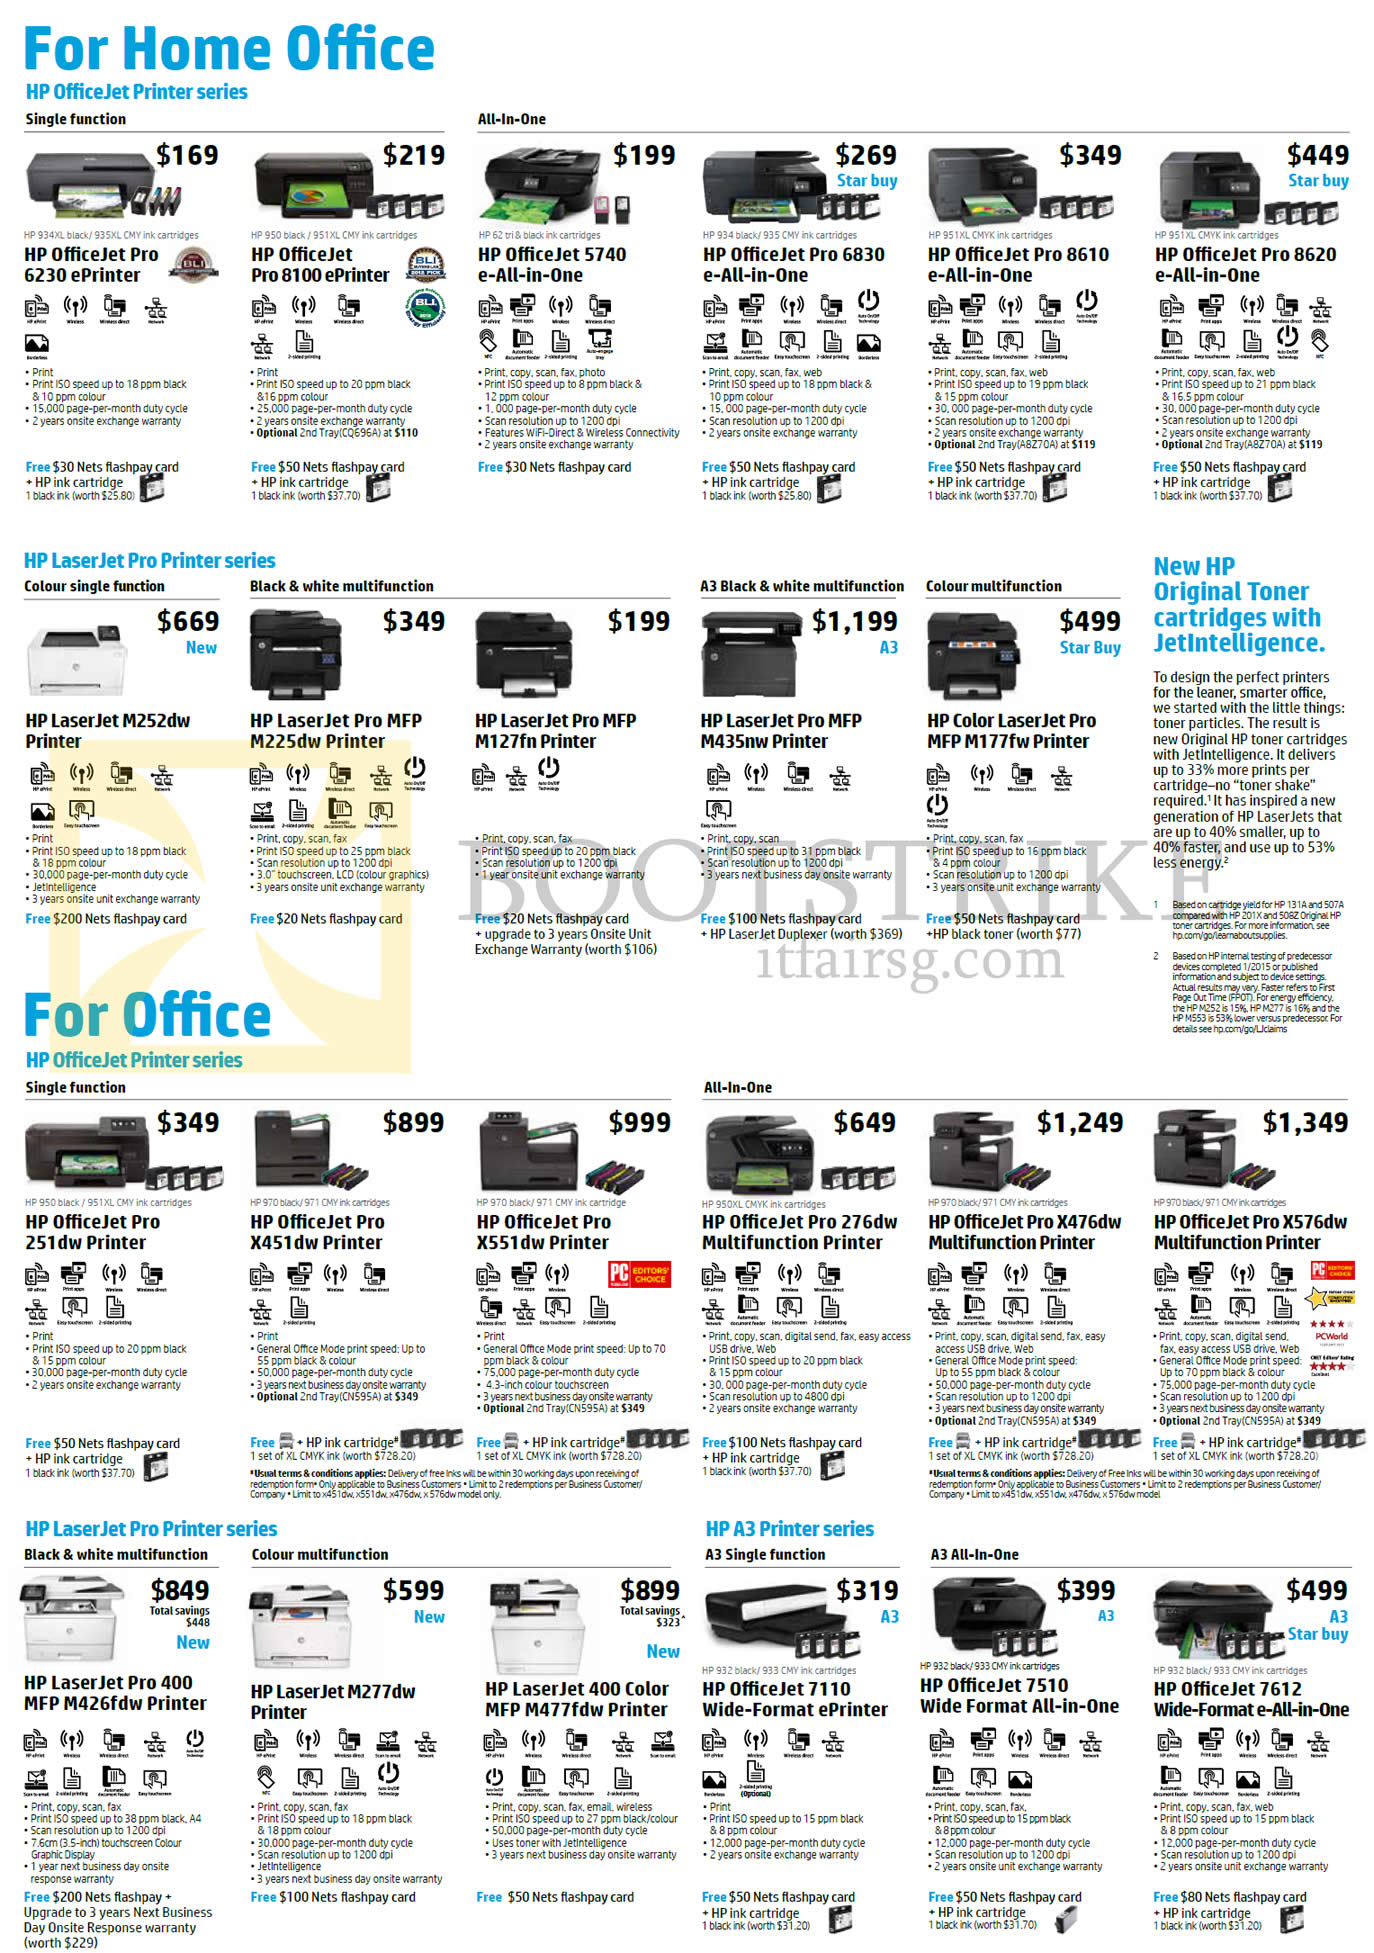 IT SHOW 2016 price list image brochure of HP Printers Officejet, Laserjet Pro, Officejet Pro, LaserJet Pro, A3, All-in-One, EPrinter, MFP, Multifunction, Wide-Format